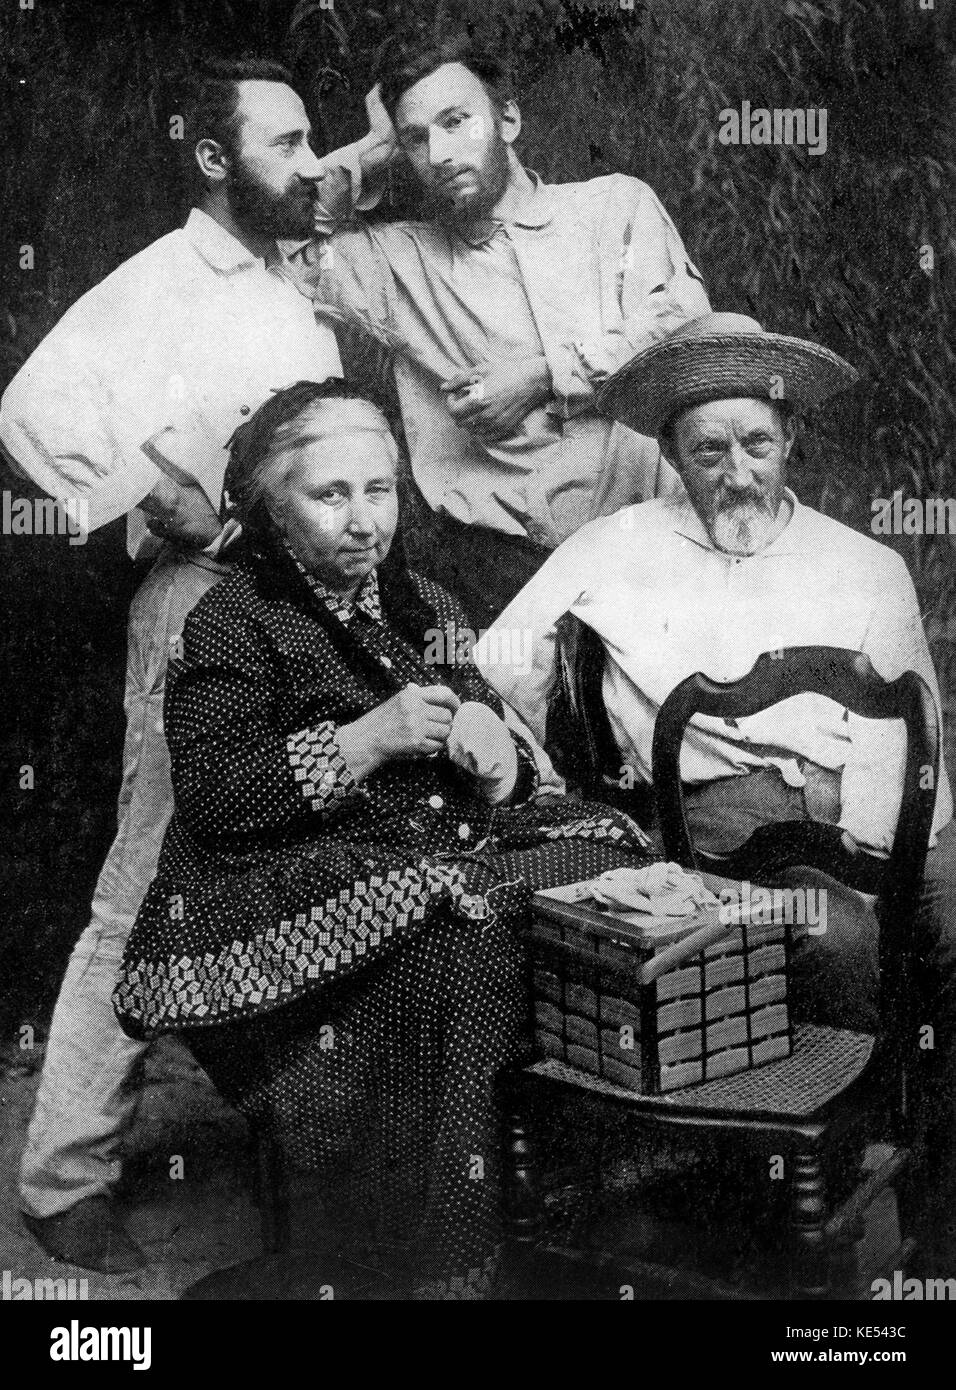 Curie family portrait. Standing are Jacques and Pierre Curie; Seated, their mother, Mme Cure, and Father, Dr Eugene Curie. Pierre shared the 1903 Nobel Prize in physics with his wife, Maria Sklodowska-Curie (Marie Curie), and Henri Becquerel. PC: French physicist and pioneer in radioactivity, 15 May, 1859 – 19 April, 1906. Stock Photo